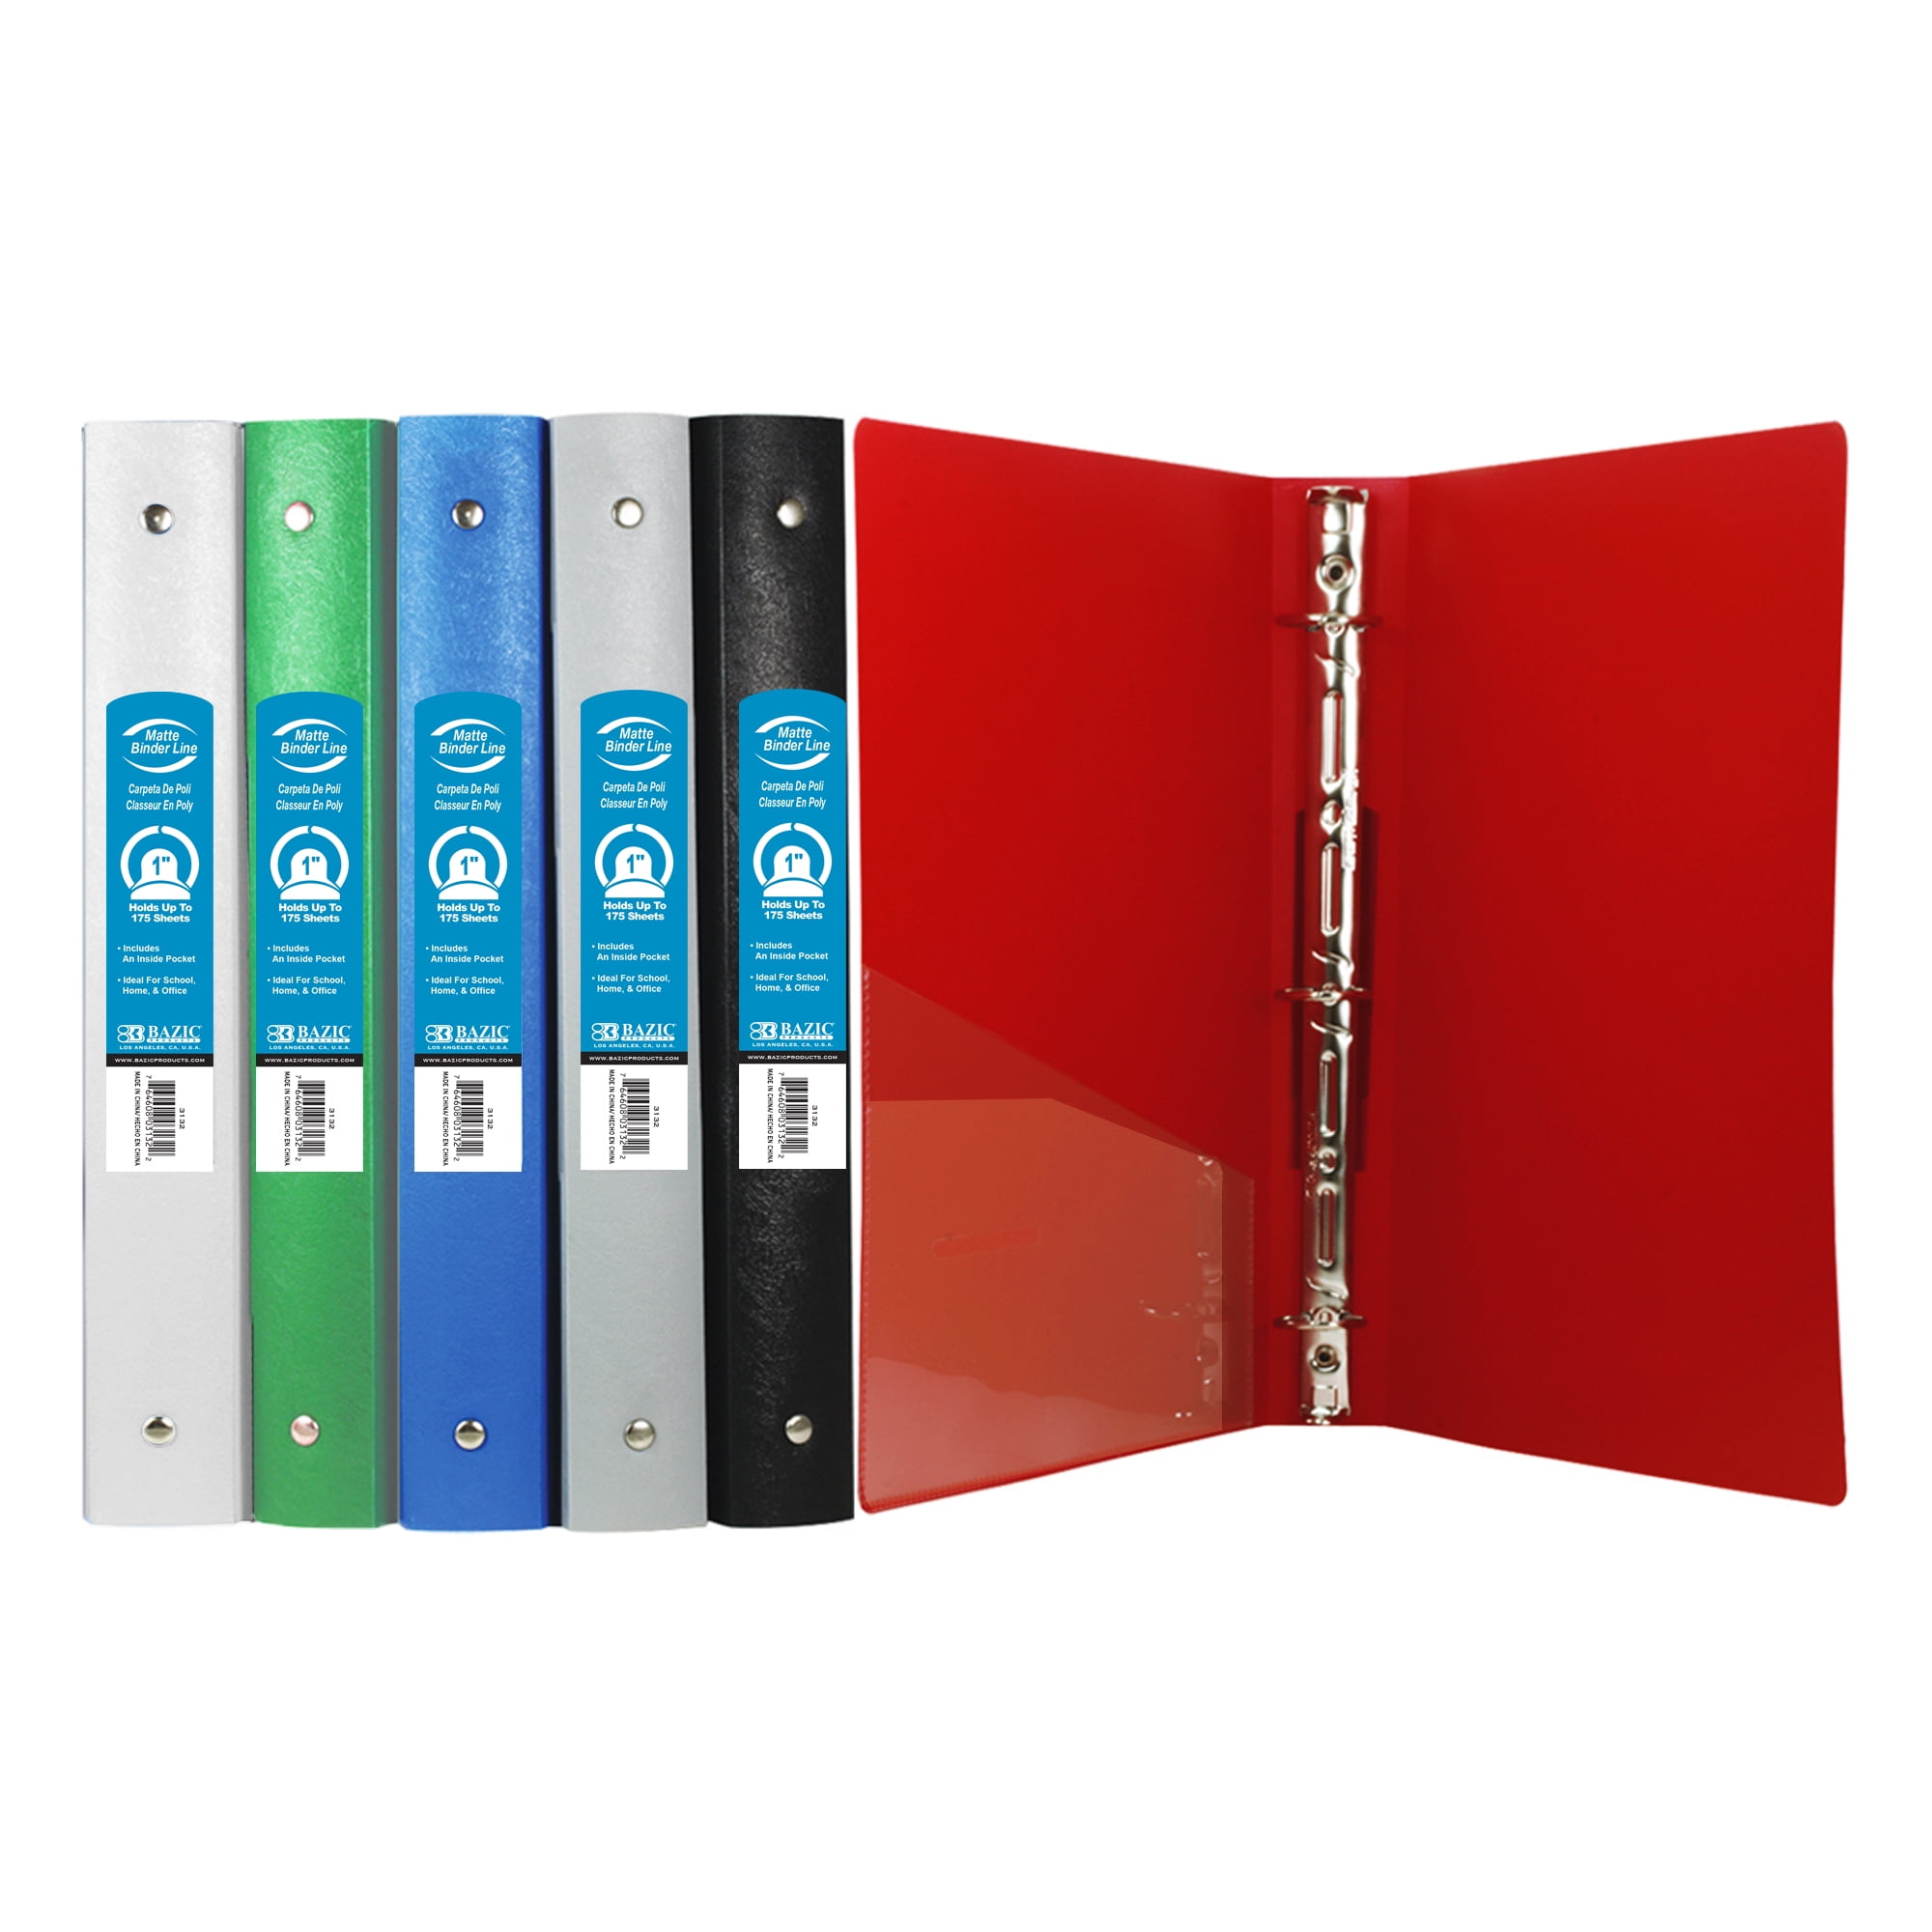 BAZIC 3 Ring Binder 1/2 Poly Presentation View Binders, 100 Sheets, 6-Count